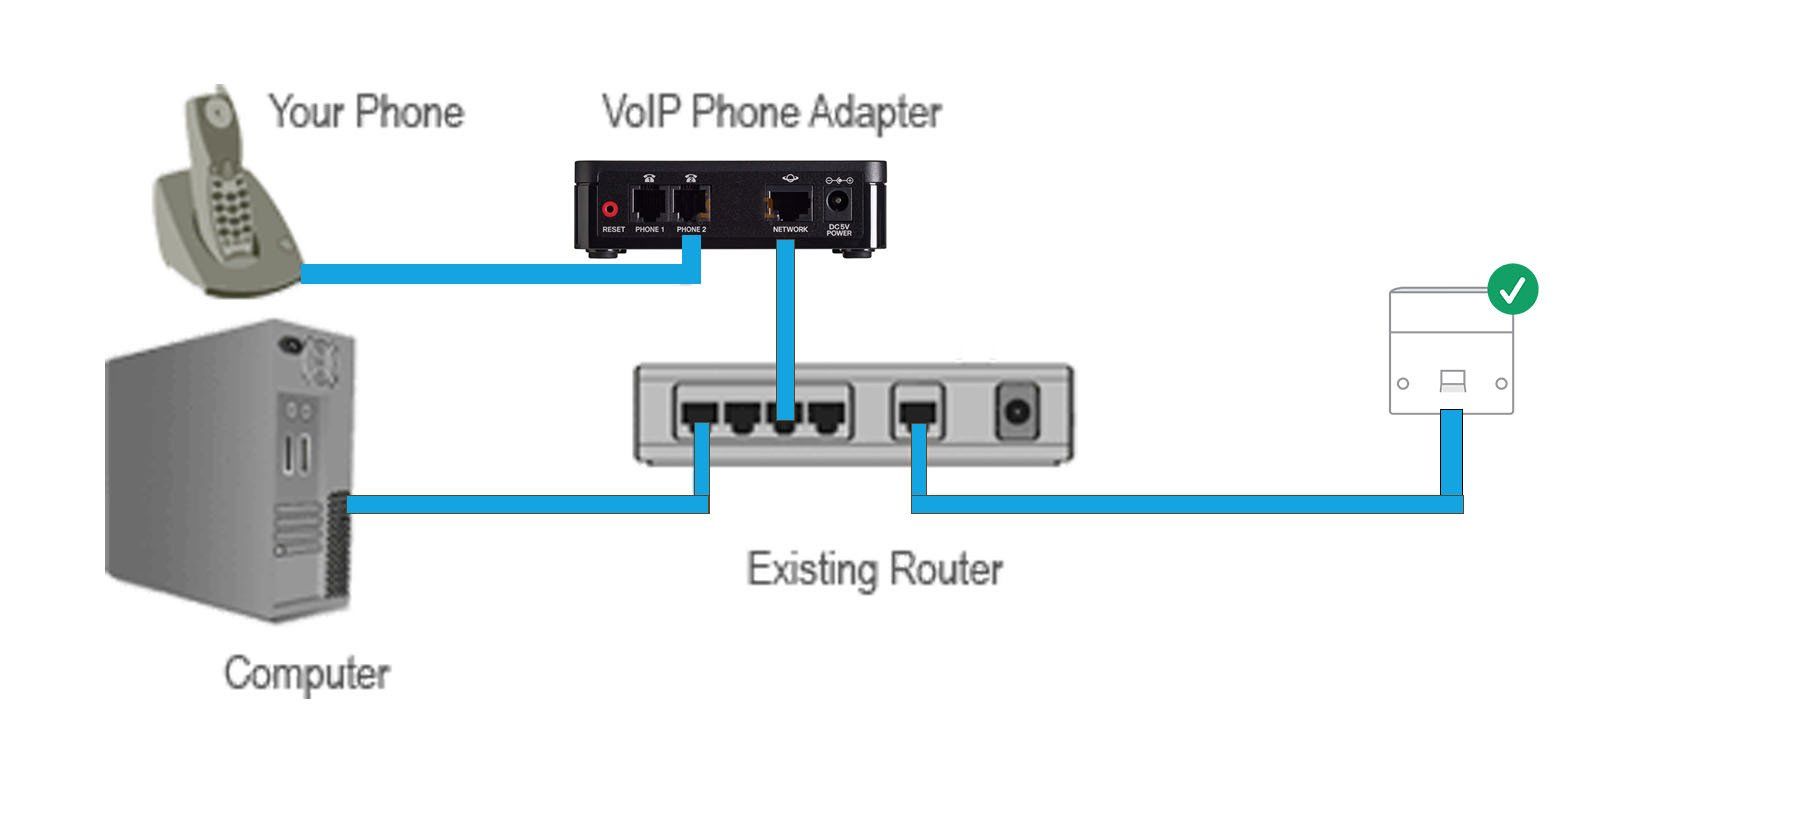 how to setup voip phone in home